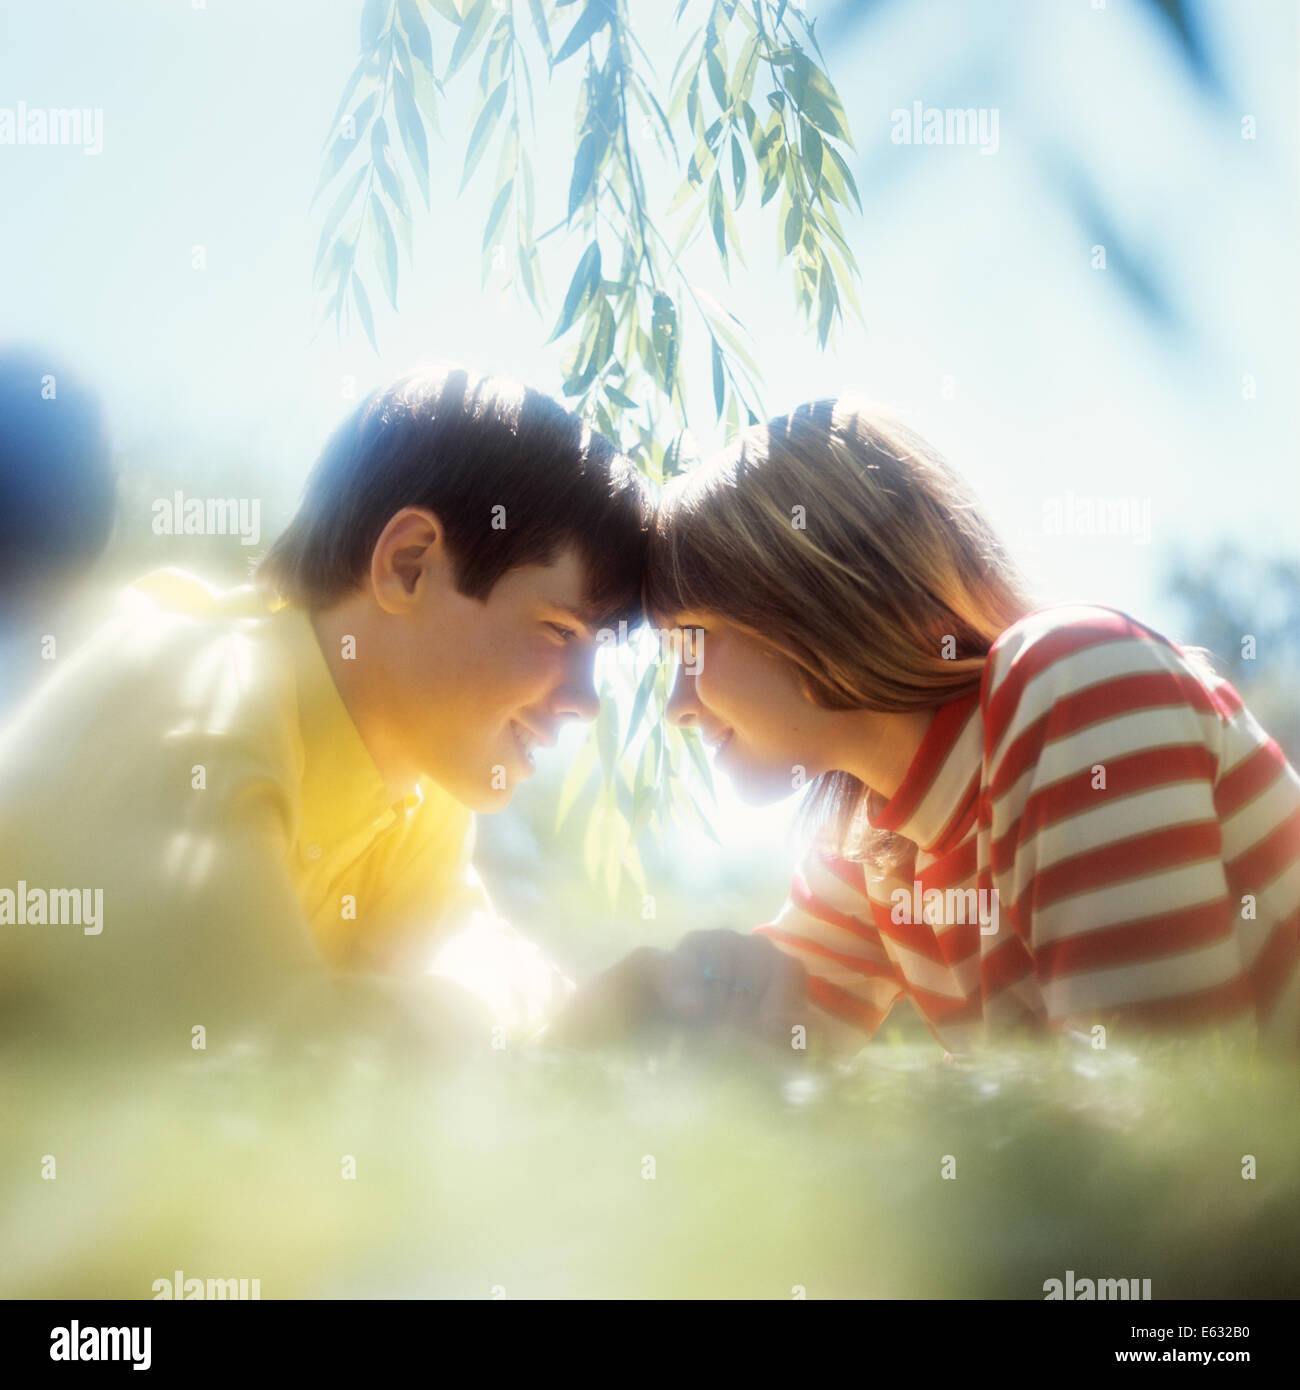 1970s TEENAGE BOY AND GIRL COUPLE LYING IN THE GRASS HEAD TO HEAD ROMANTIC SOFT FOCUS POSE Stock Photo